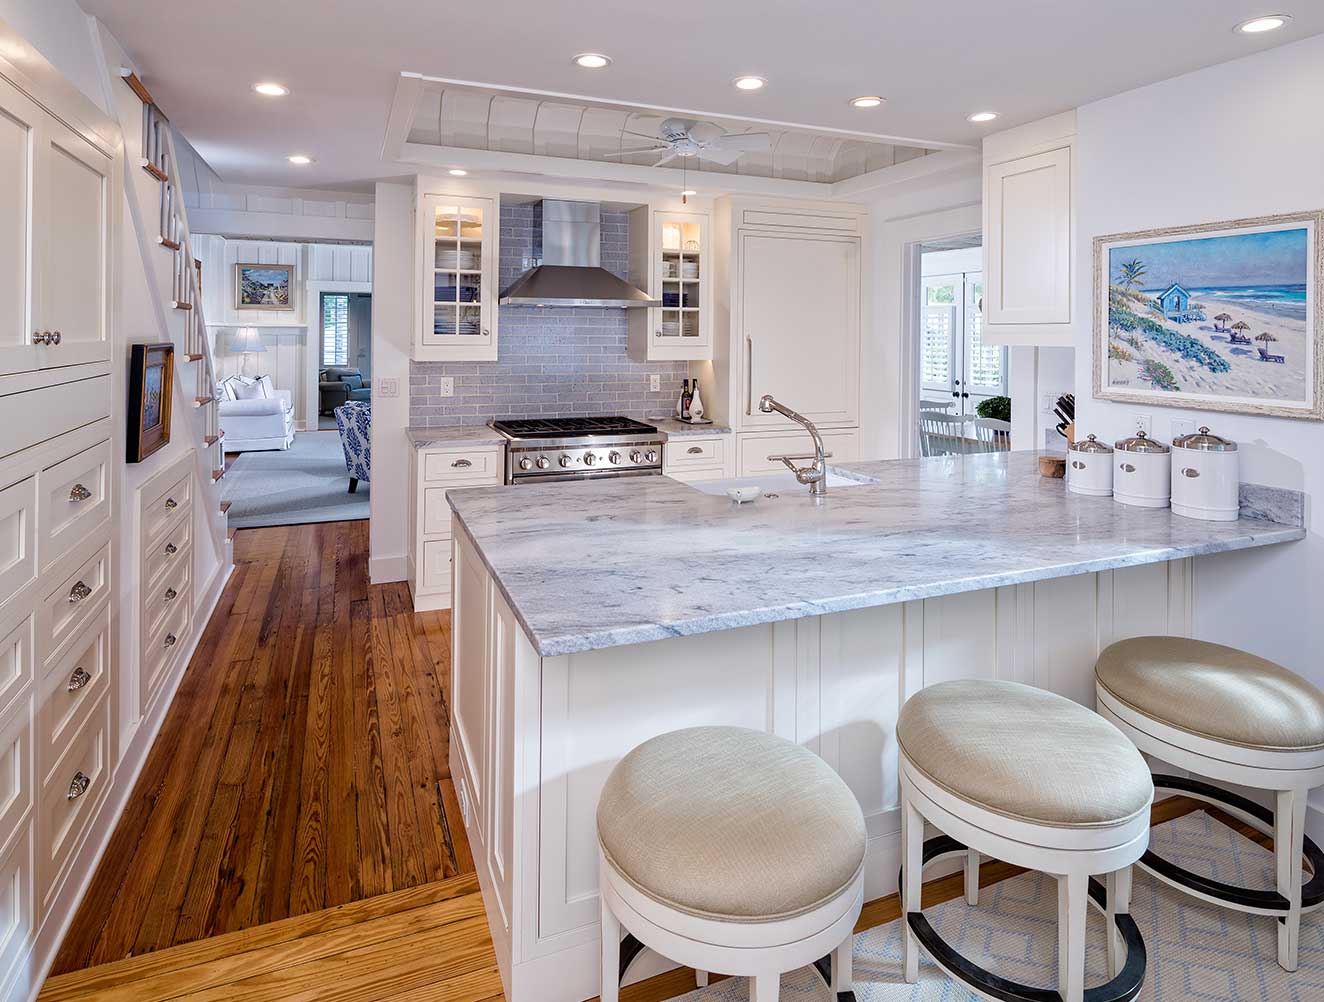 Coastal kitchen with custom cabinetry